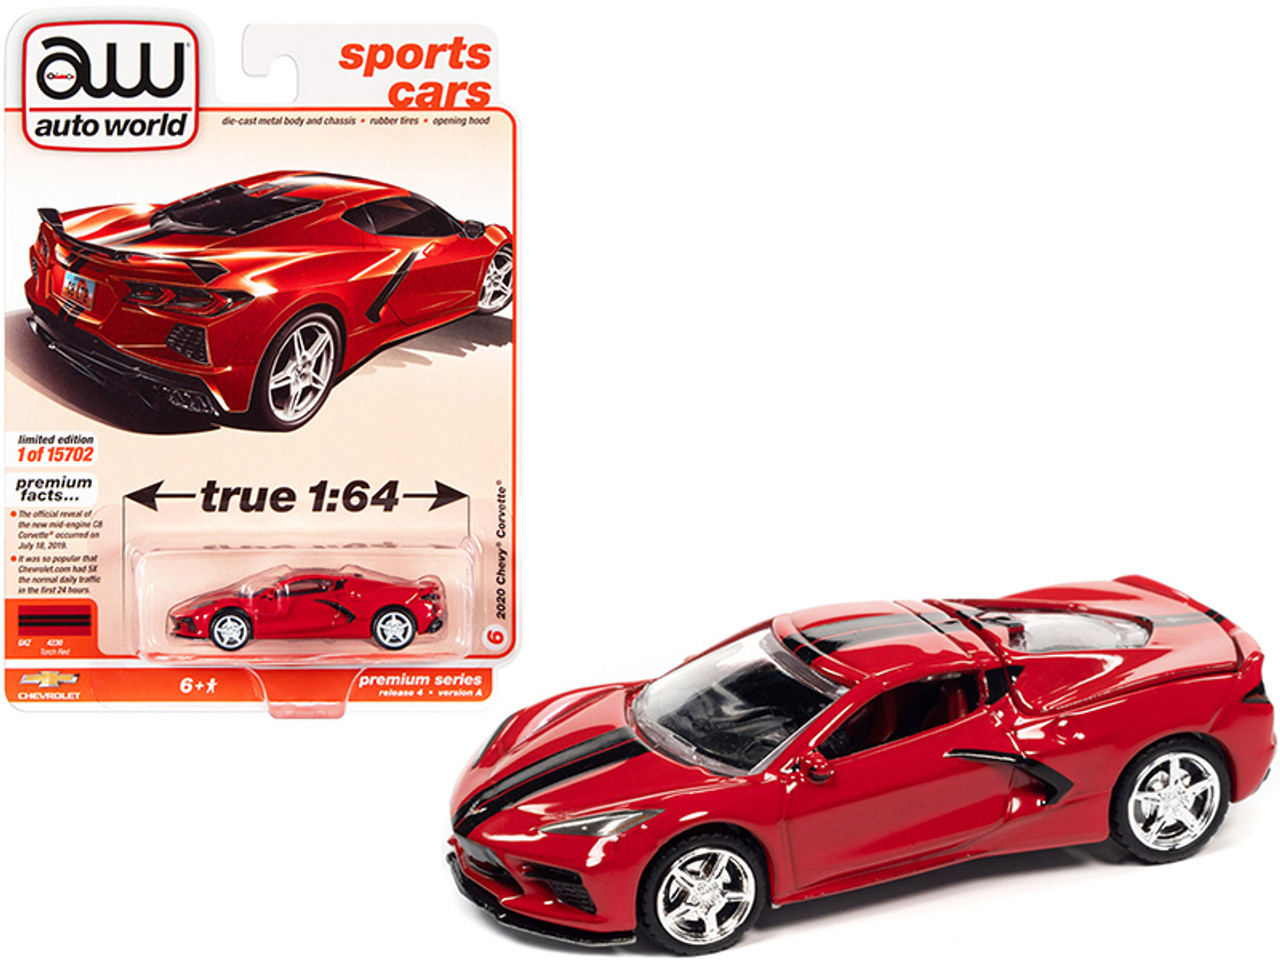 2020 Chevrolet Corvette C8 Stingray Torch Red with Twin Black Stripes "Sports Cars" Limited Edition to 15702 pieces Worldwide 1/64 Diecast Model Car by Autoworld